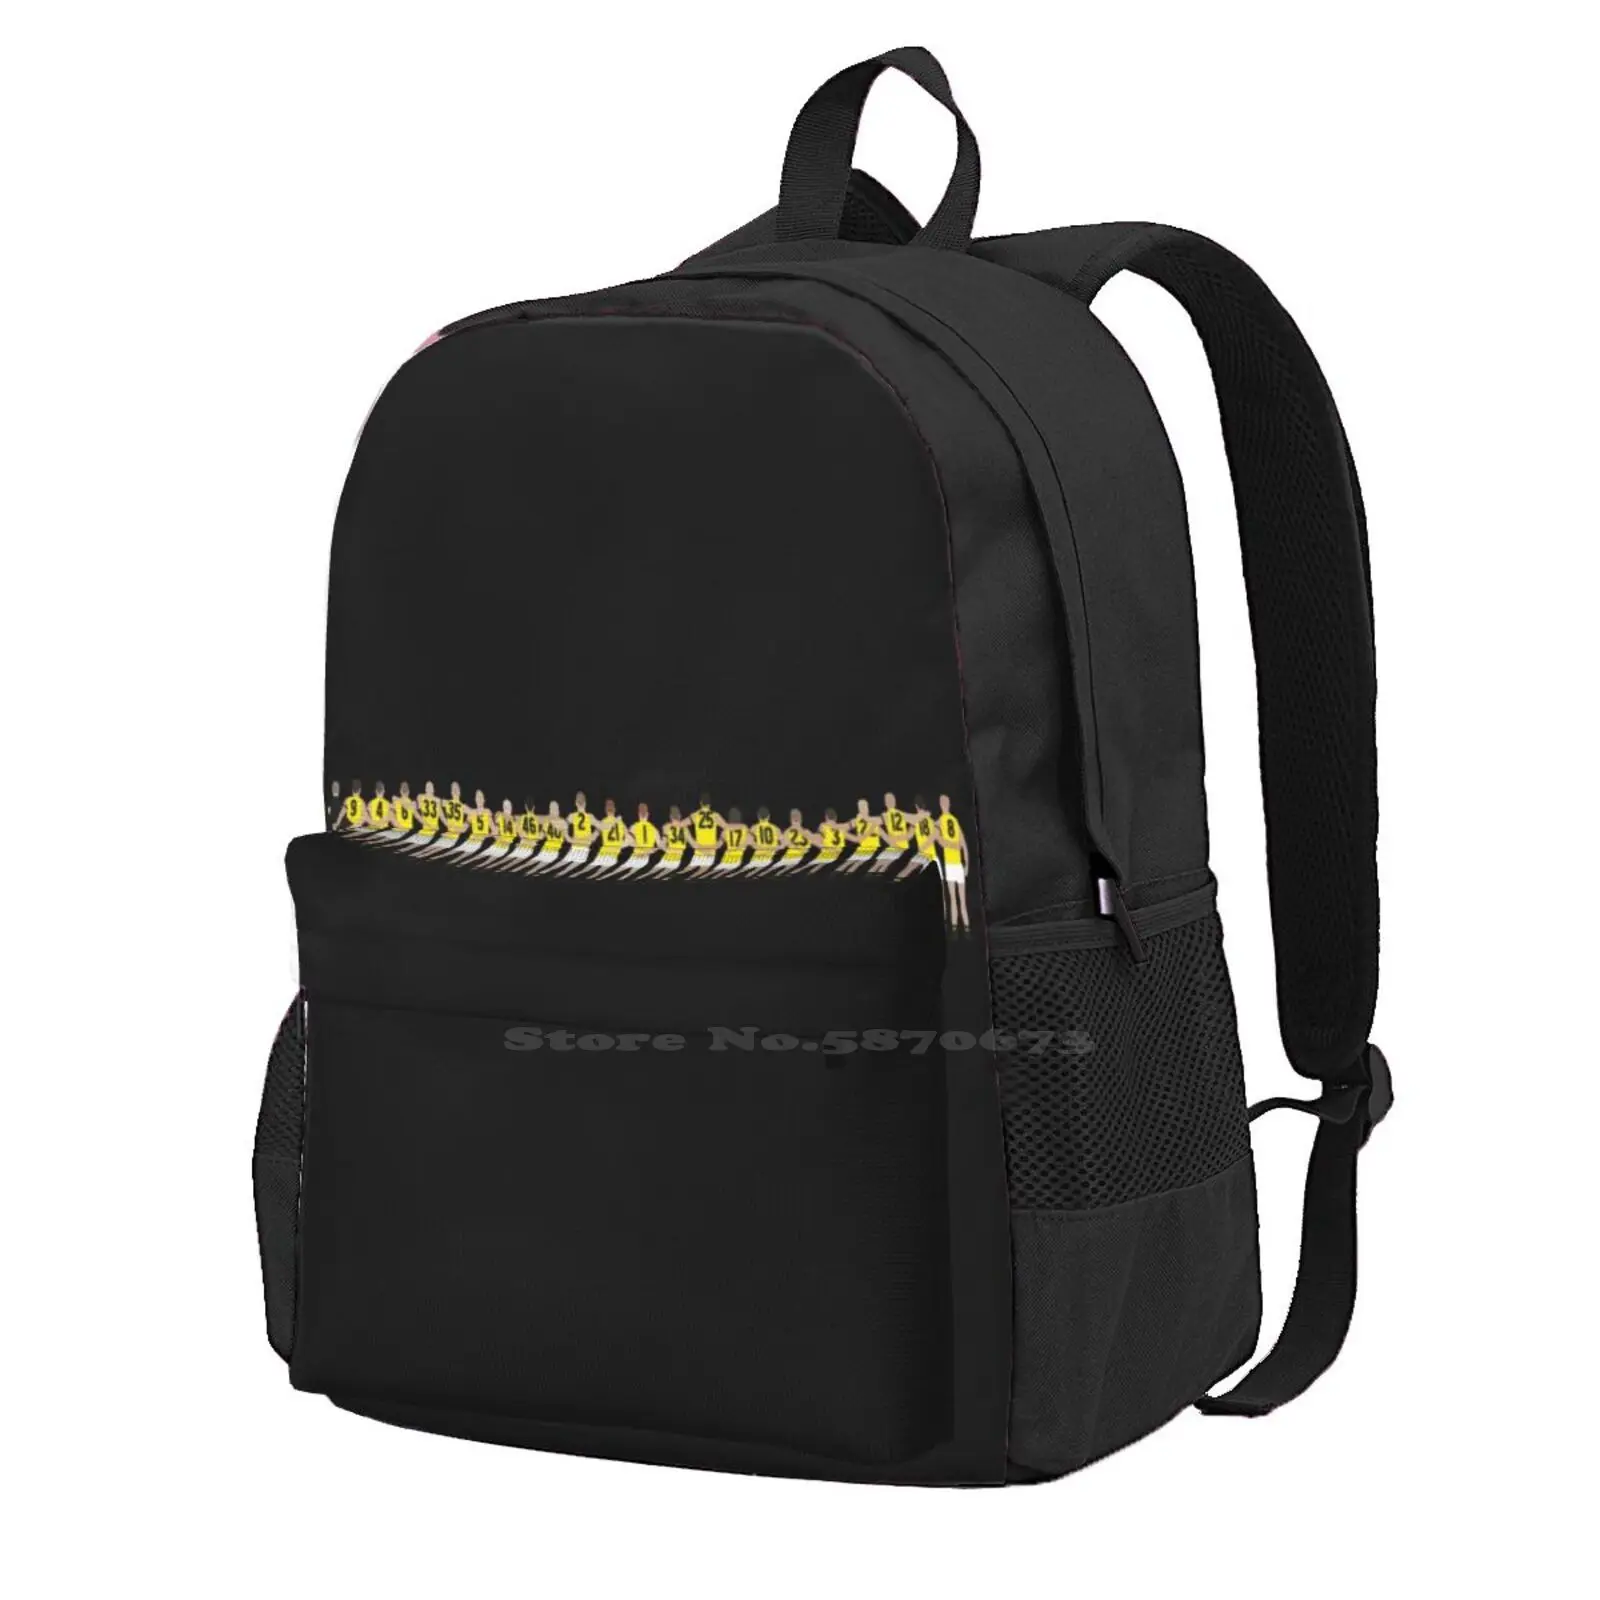 

Tigers Together 2017 Backpack For Student School Laptop Travel Bag 2017 Premiers Richmond Tigers Together